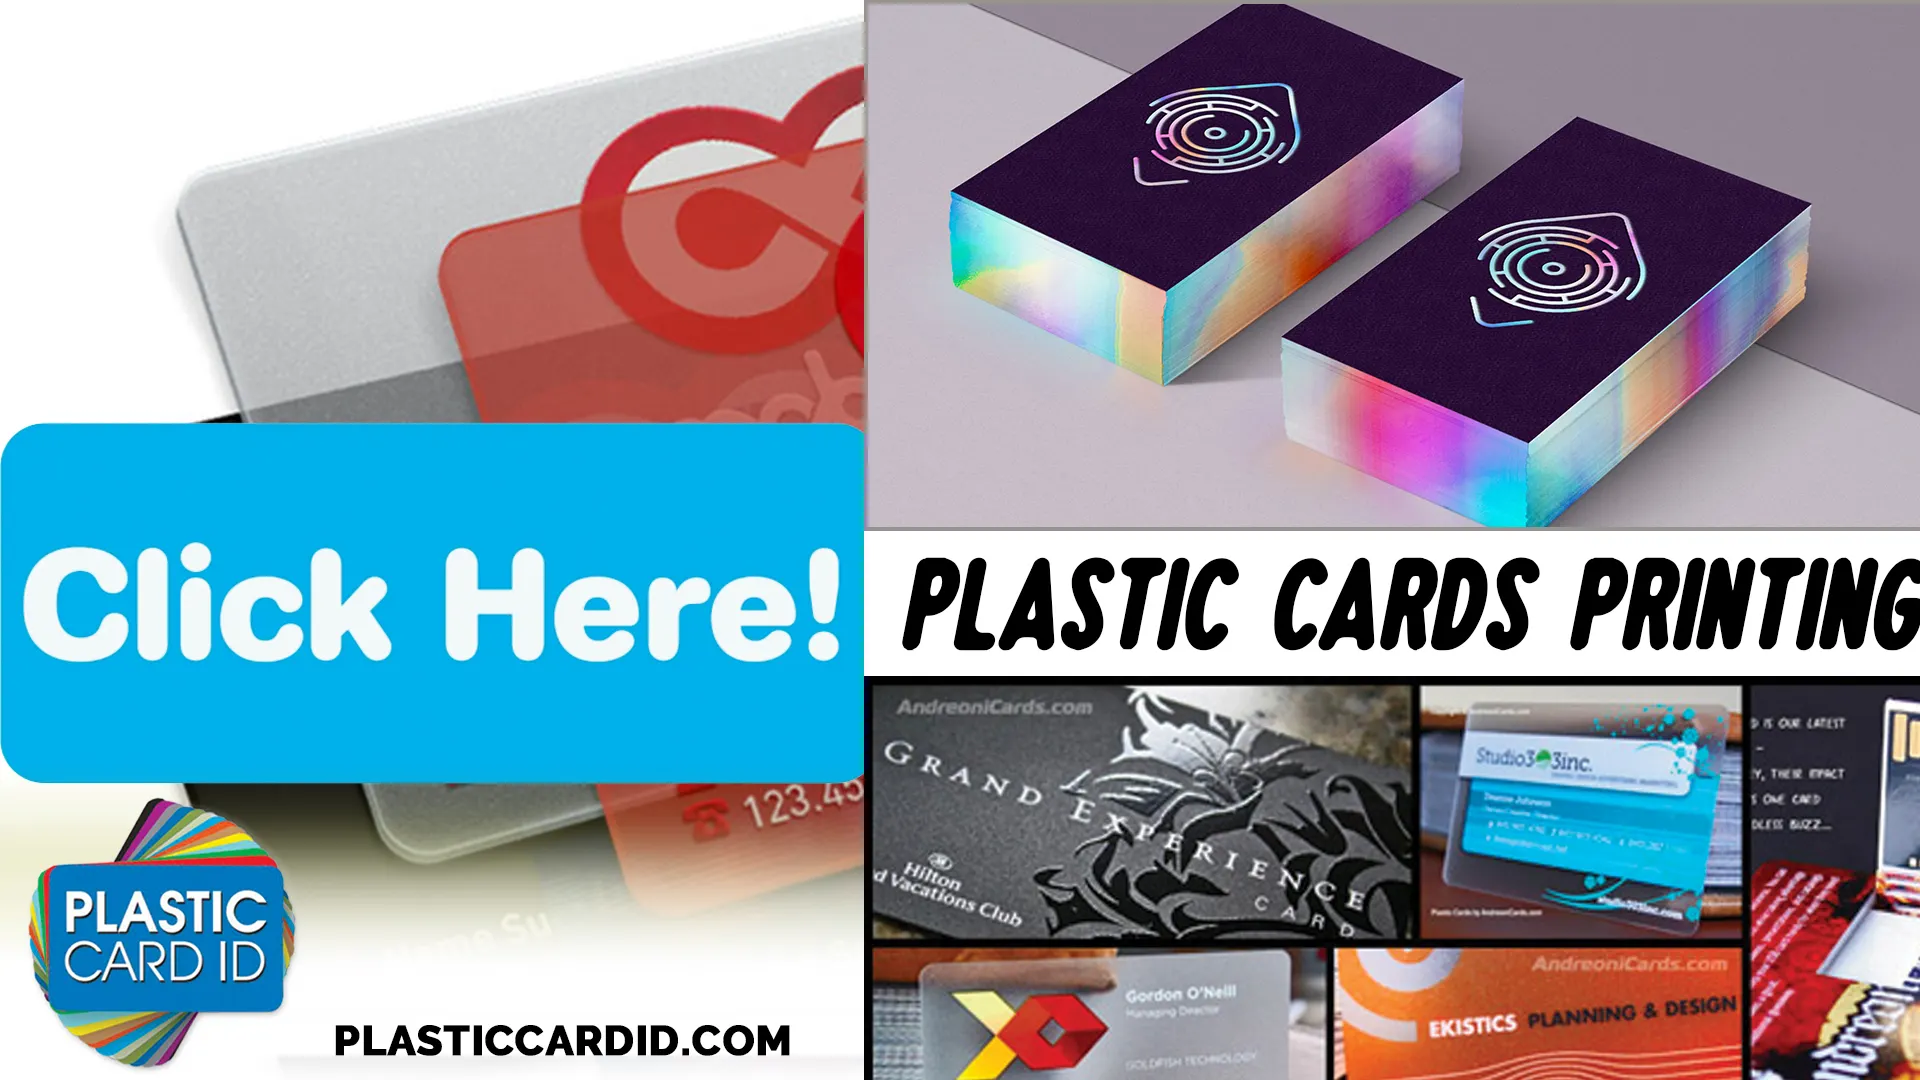 Explore the Range of Plastic Cards We Offer